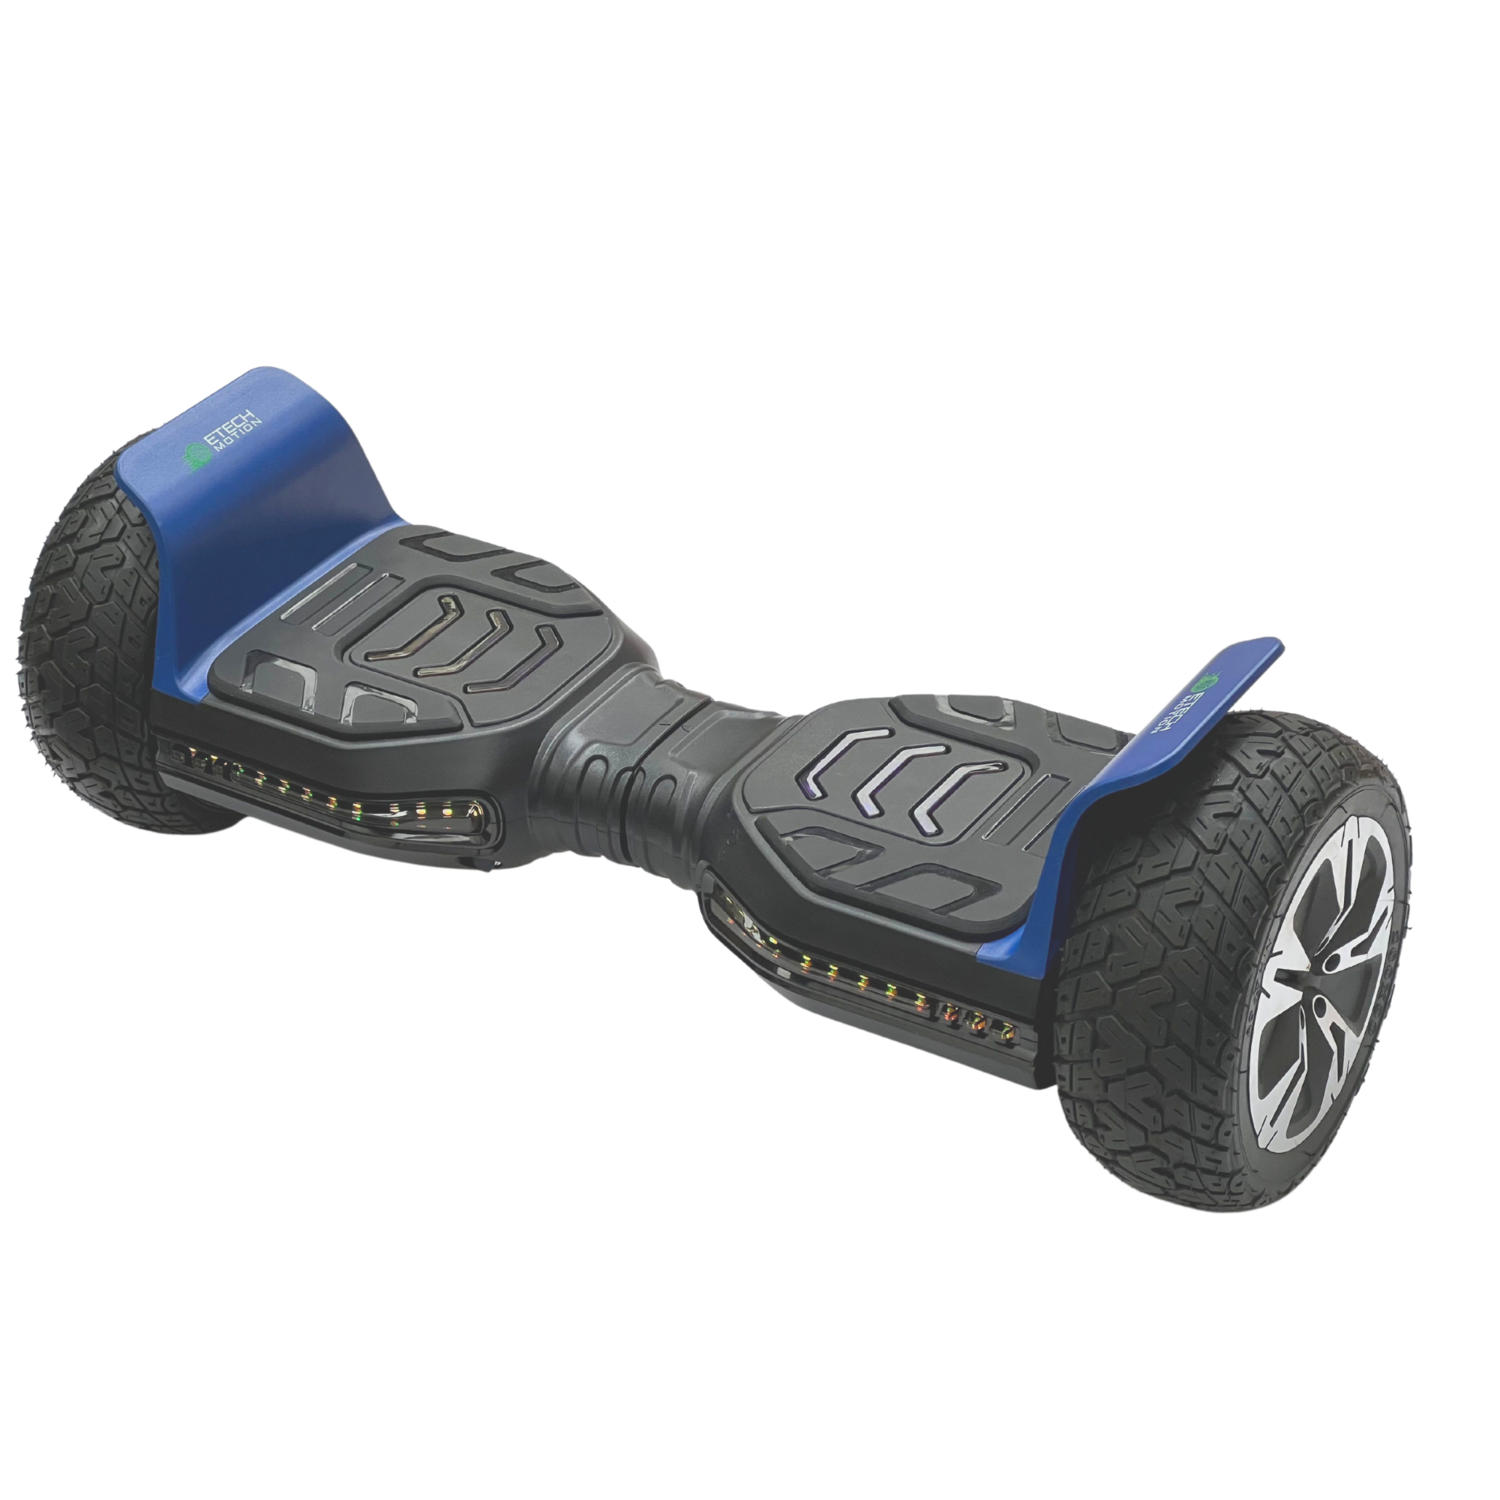 G5 XR PRO Off Road Water resistant IPX4 Hoverboard 8.5 inch Black with Blue Fenders